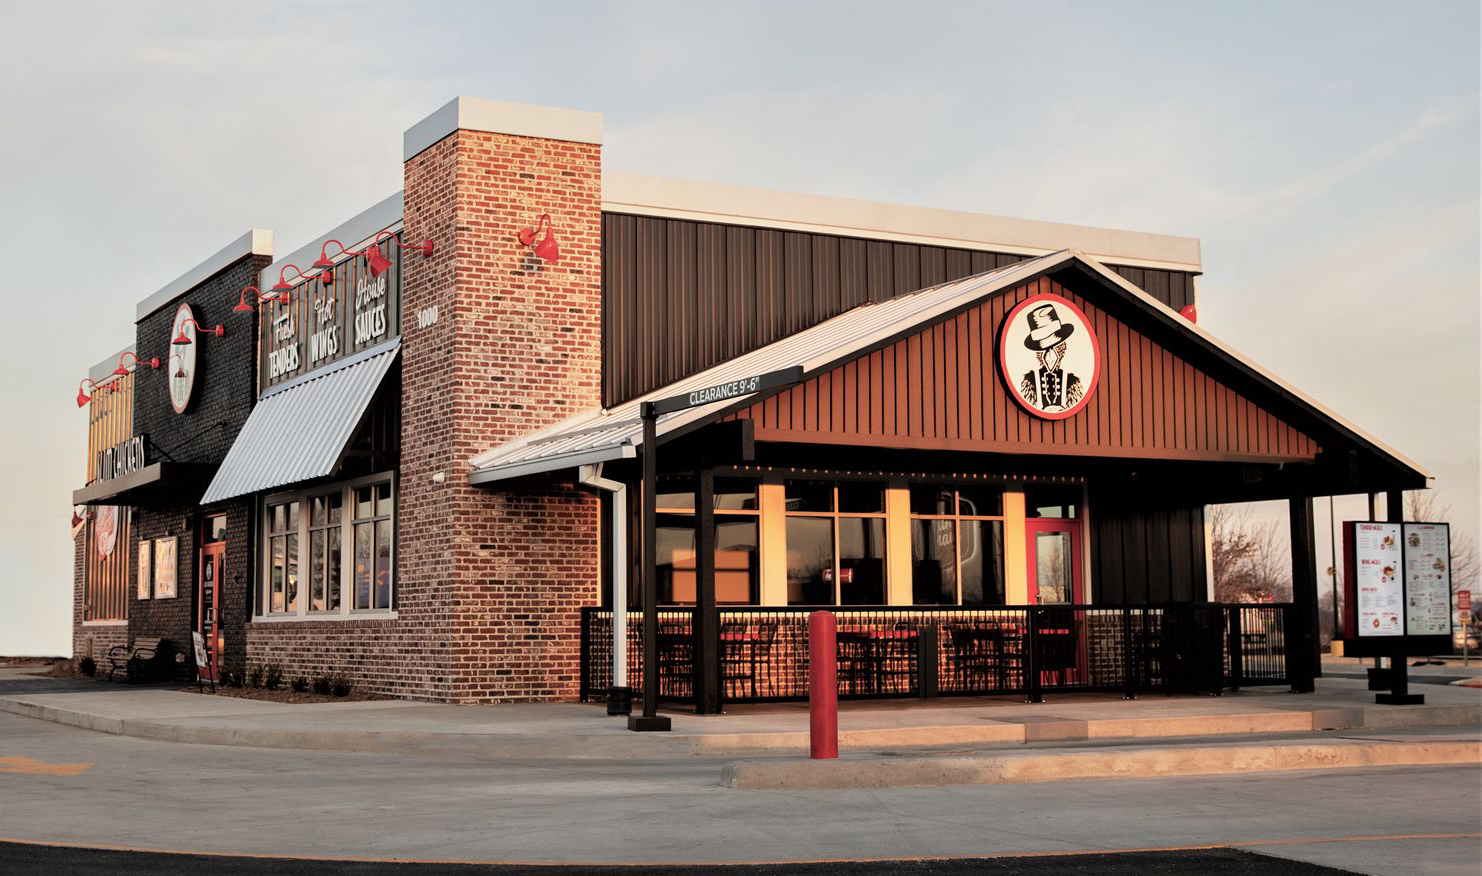 The Slim Chickens in Bentonville, Arkansas, opened in 2022 and features the chain's new architectural design.